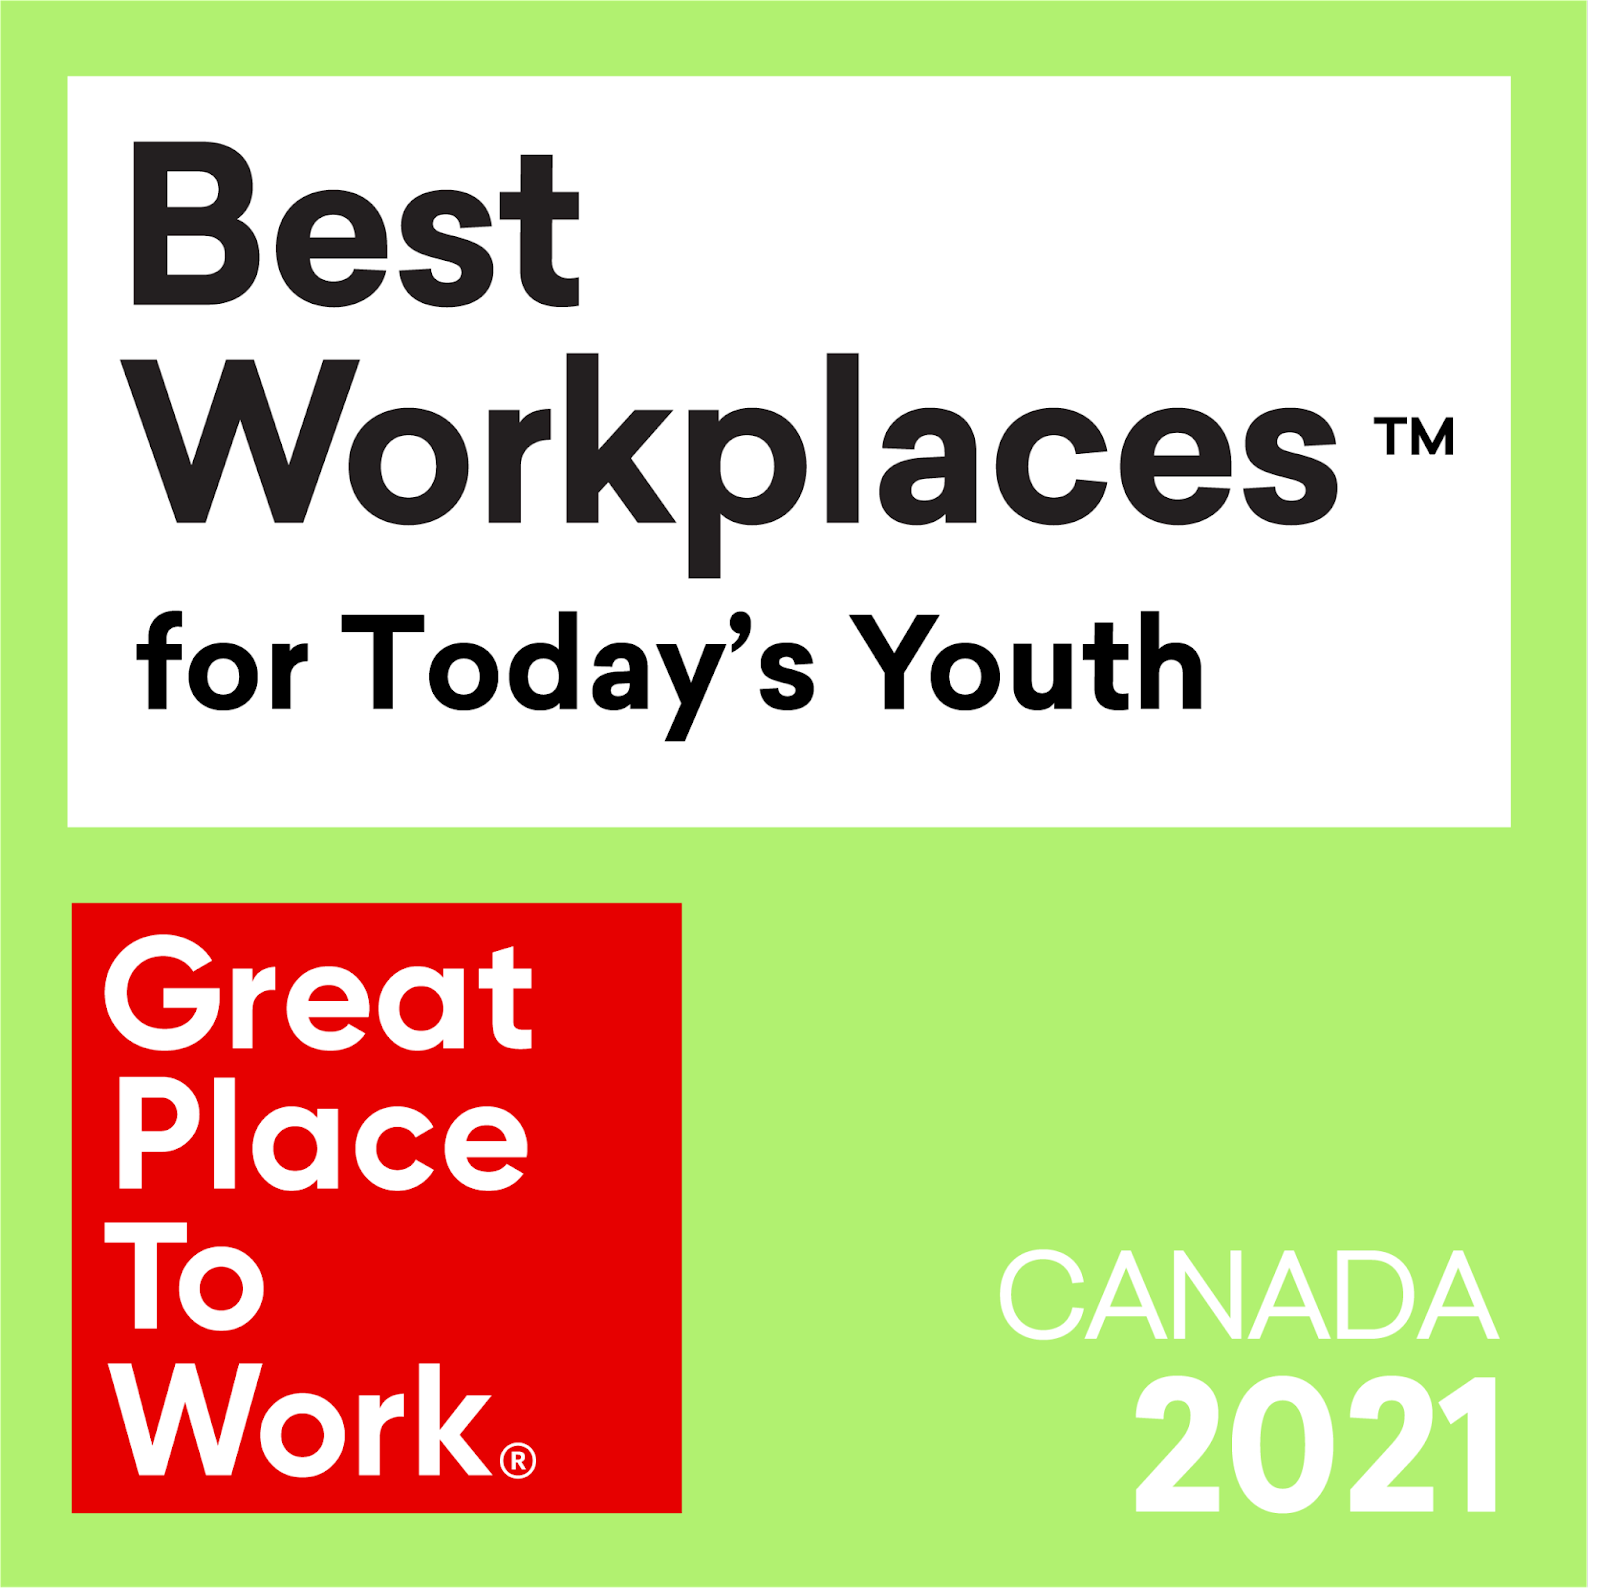 Great place to work Best workplaces for Todays youth 2021